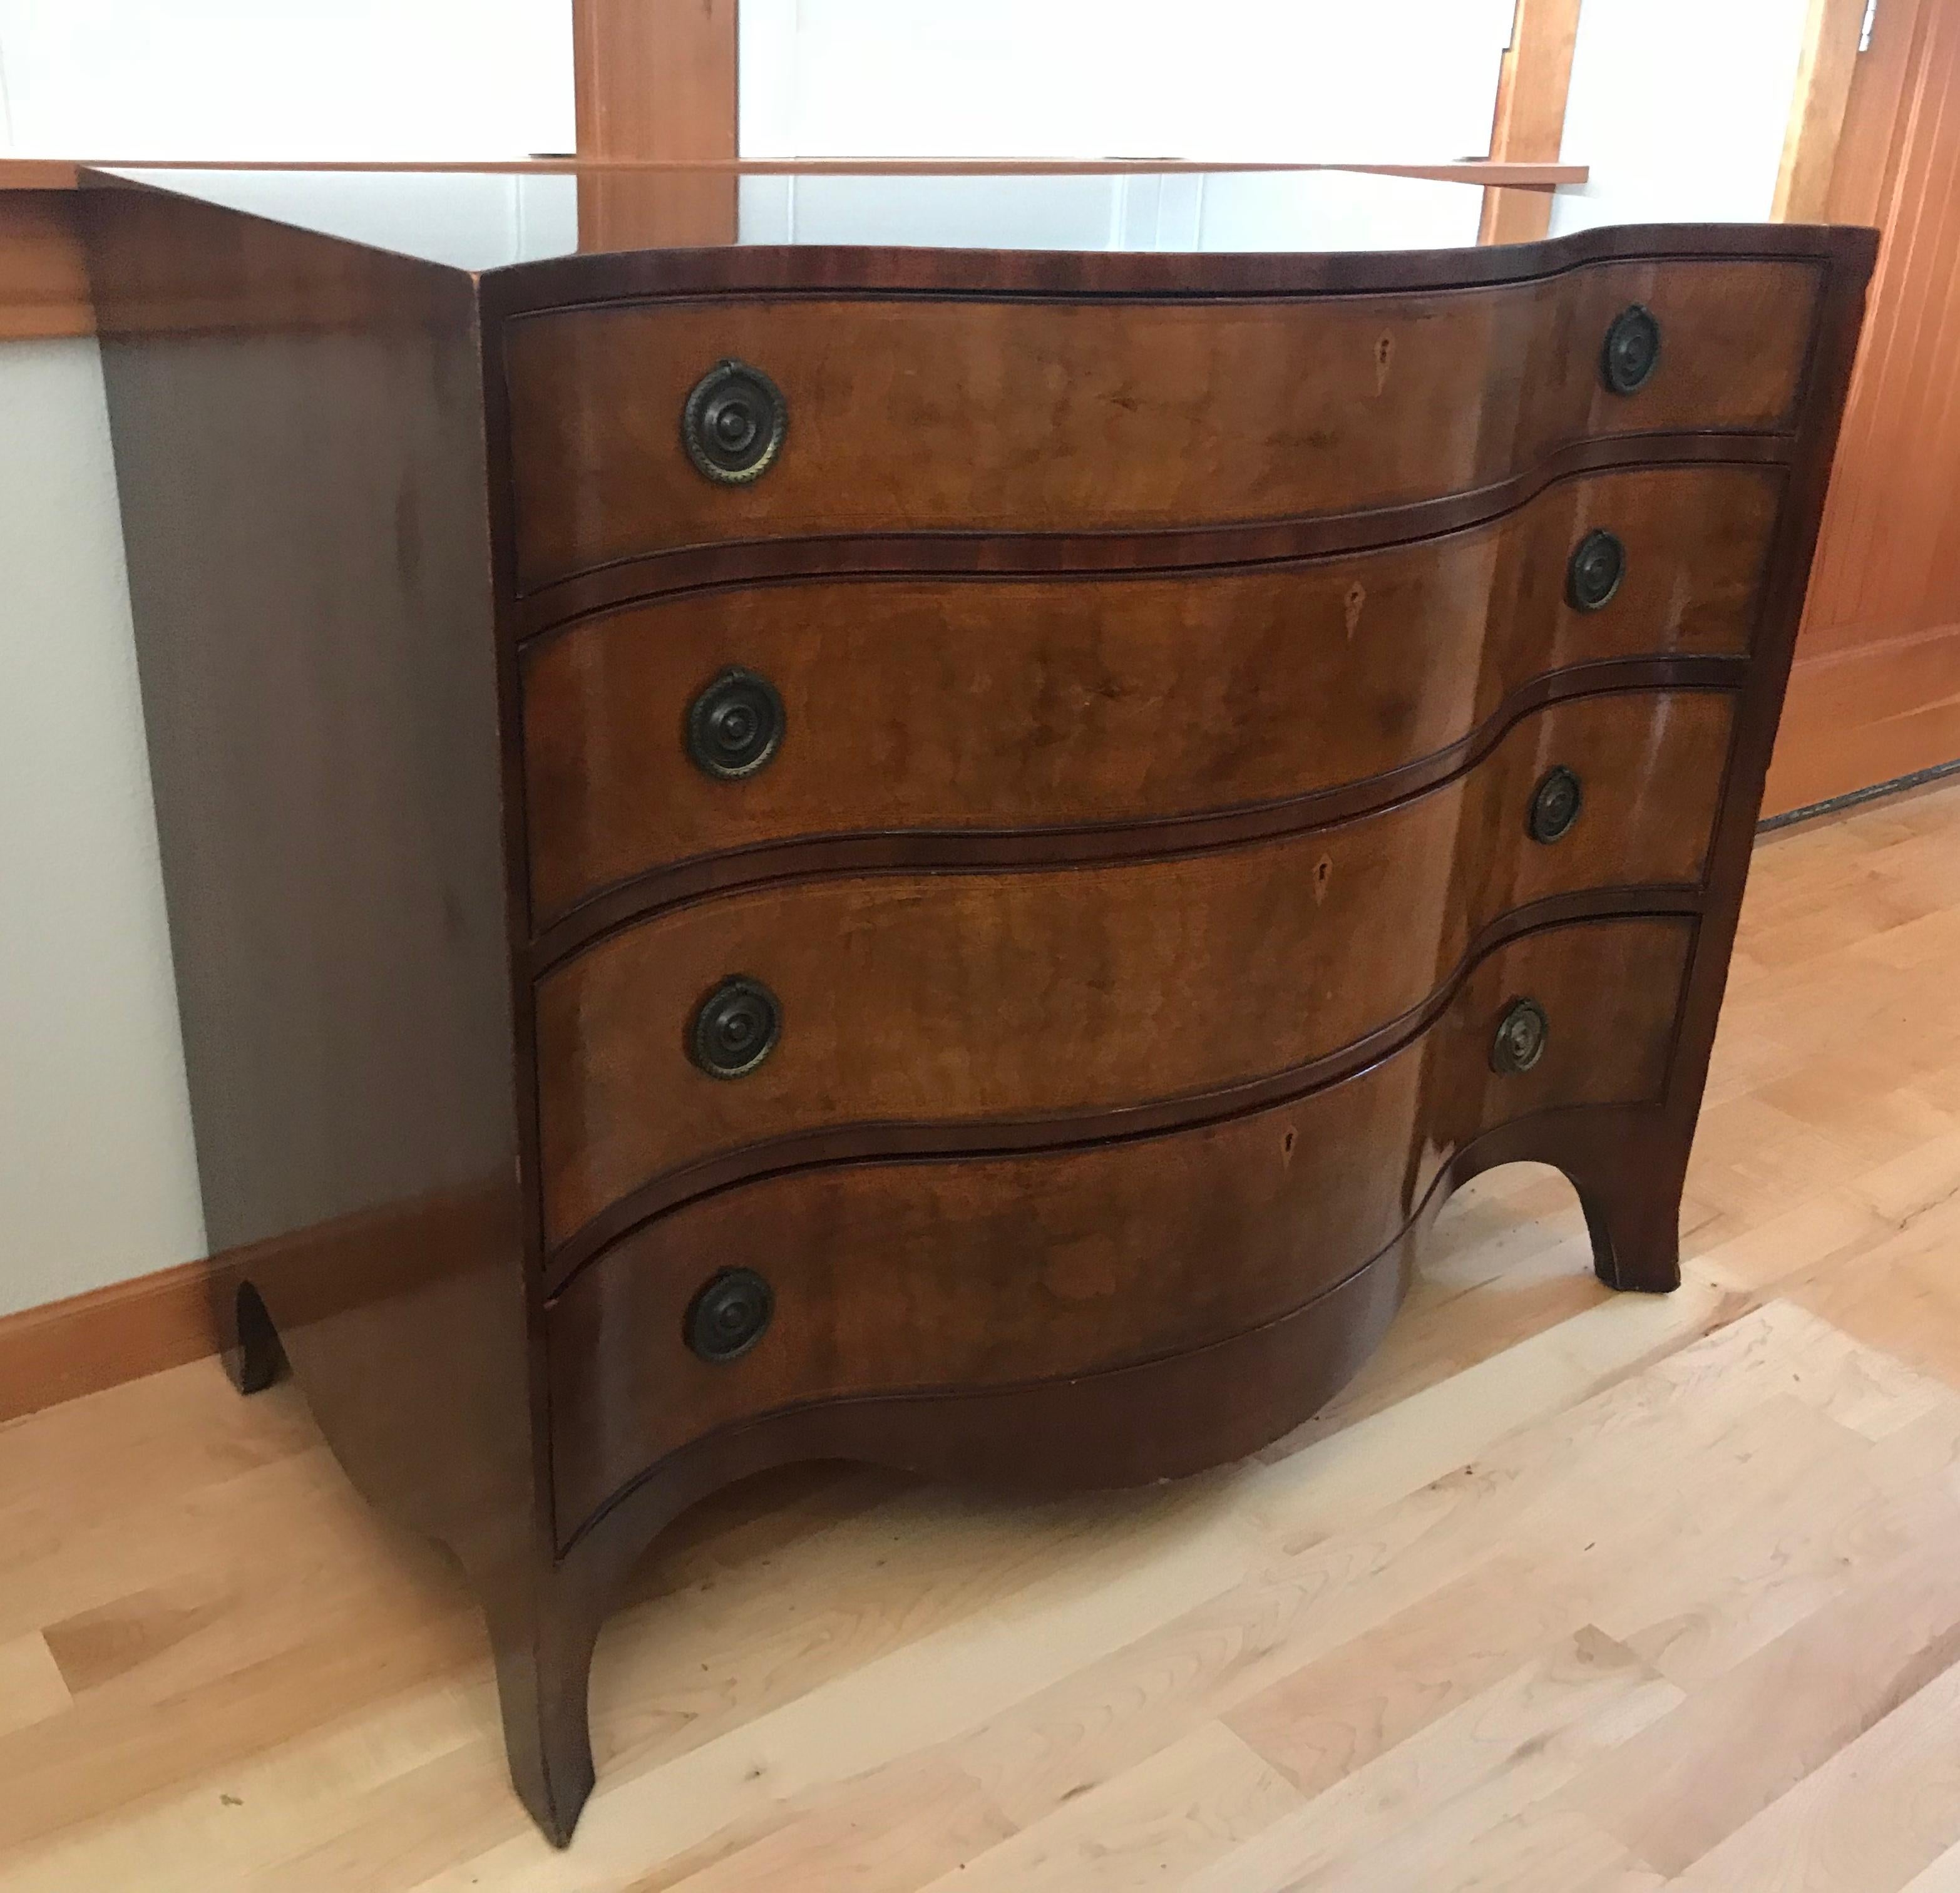 A  highly sought after set of two matching Hepplewhite wavy front chest of drawers of Mahogany with satinwood and rosewood lines inlays and ringed aged brass pulls. Four large drawers each and with splayed feet. Based on an English design of 1785.